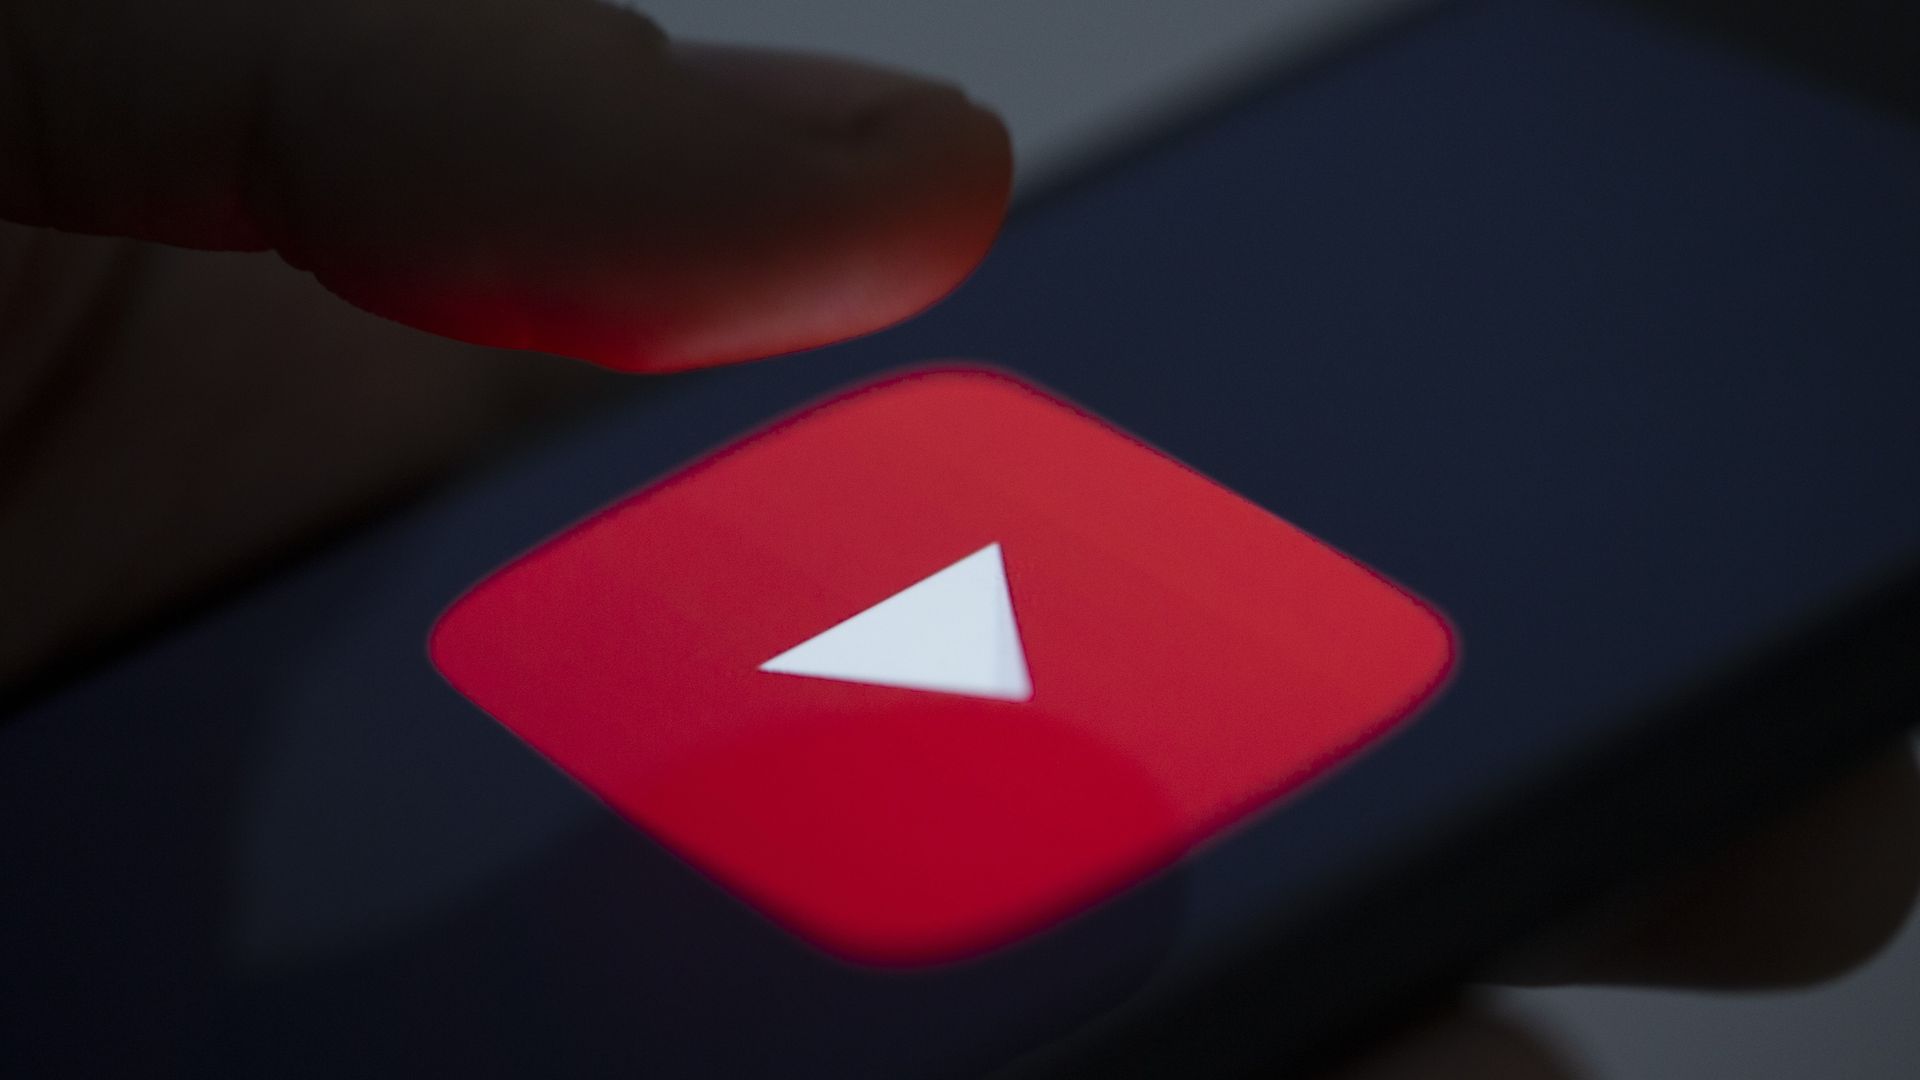 The YouTube logo appears on a smartphone screen.